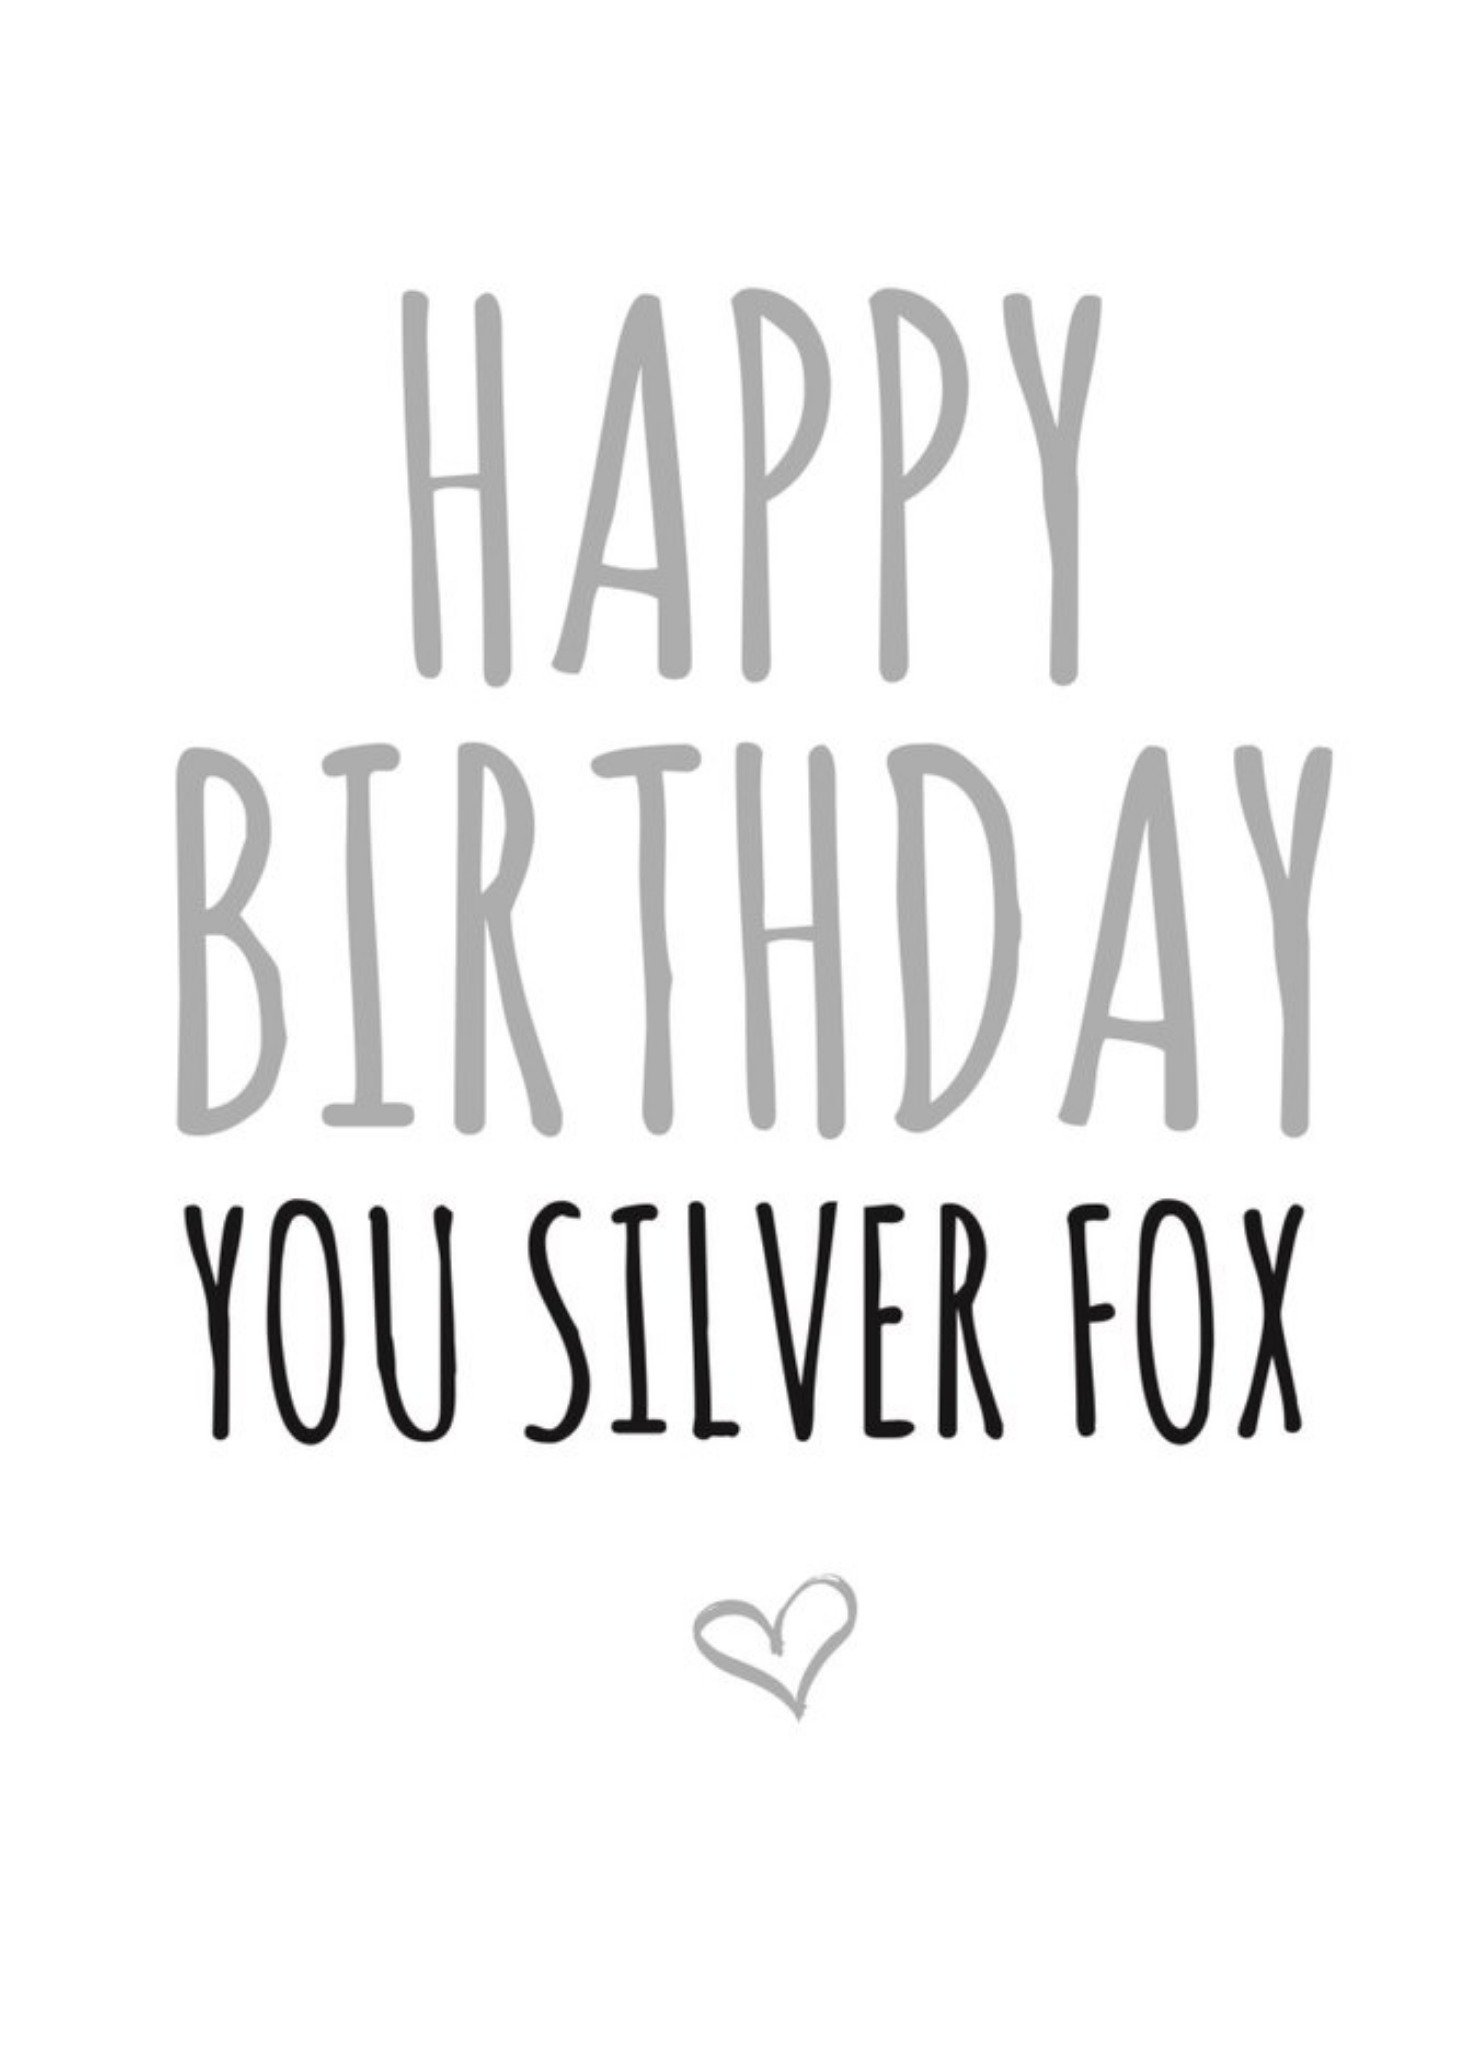 Banter King Typographical Happy Birthday You Silver Fox Card Ecard